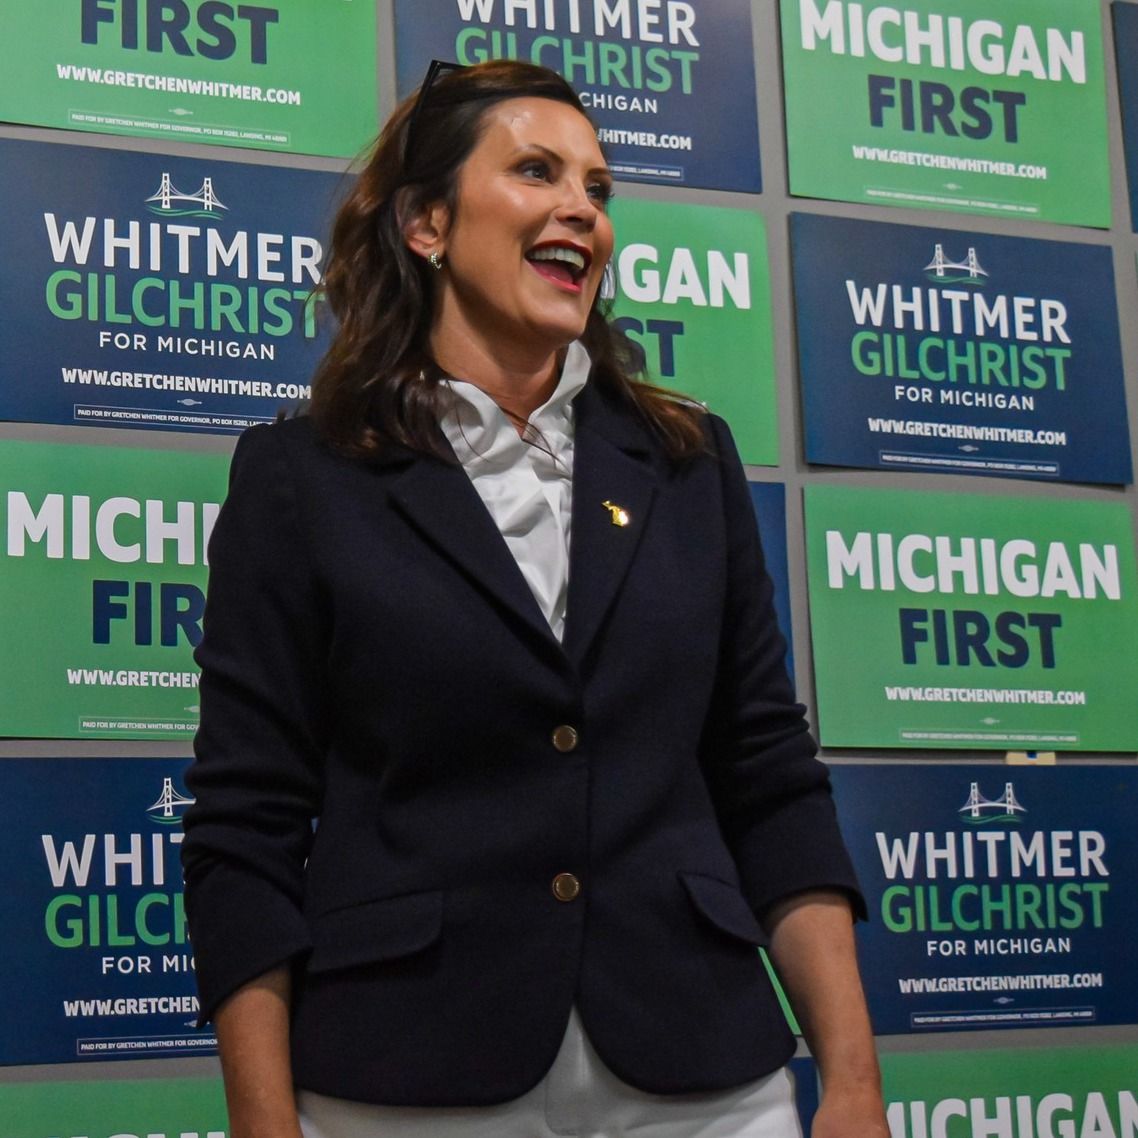 Following Whitmer’s Ruling, Proposed East Lansing Charter Amendment Won’t Go to Ballot